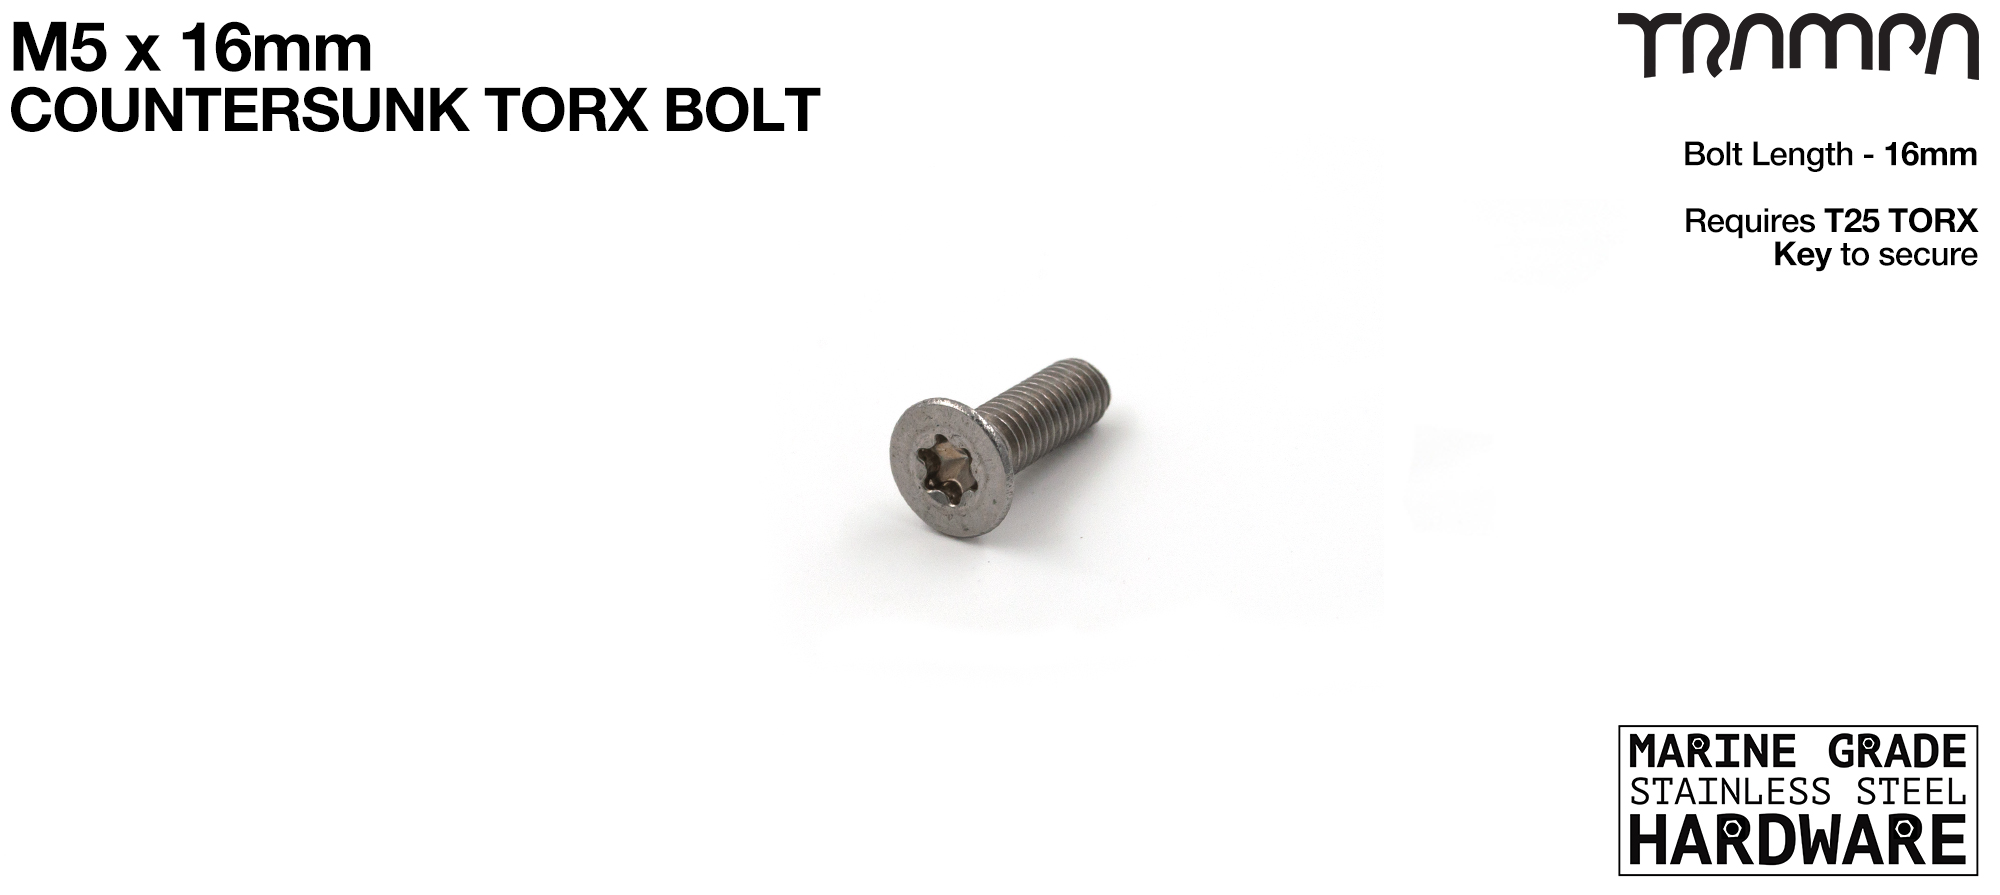 M5 x 16mm TORX Countersunk Bolt - Marine Grade Stainless steel with Fitting